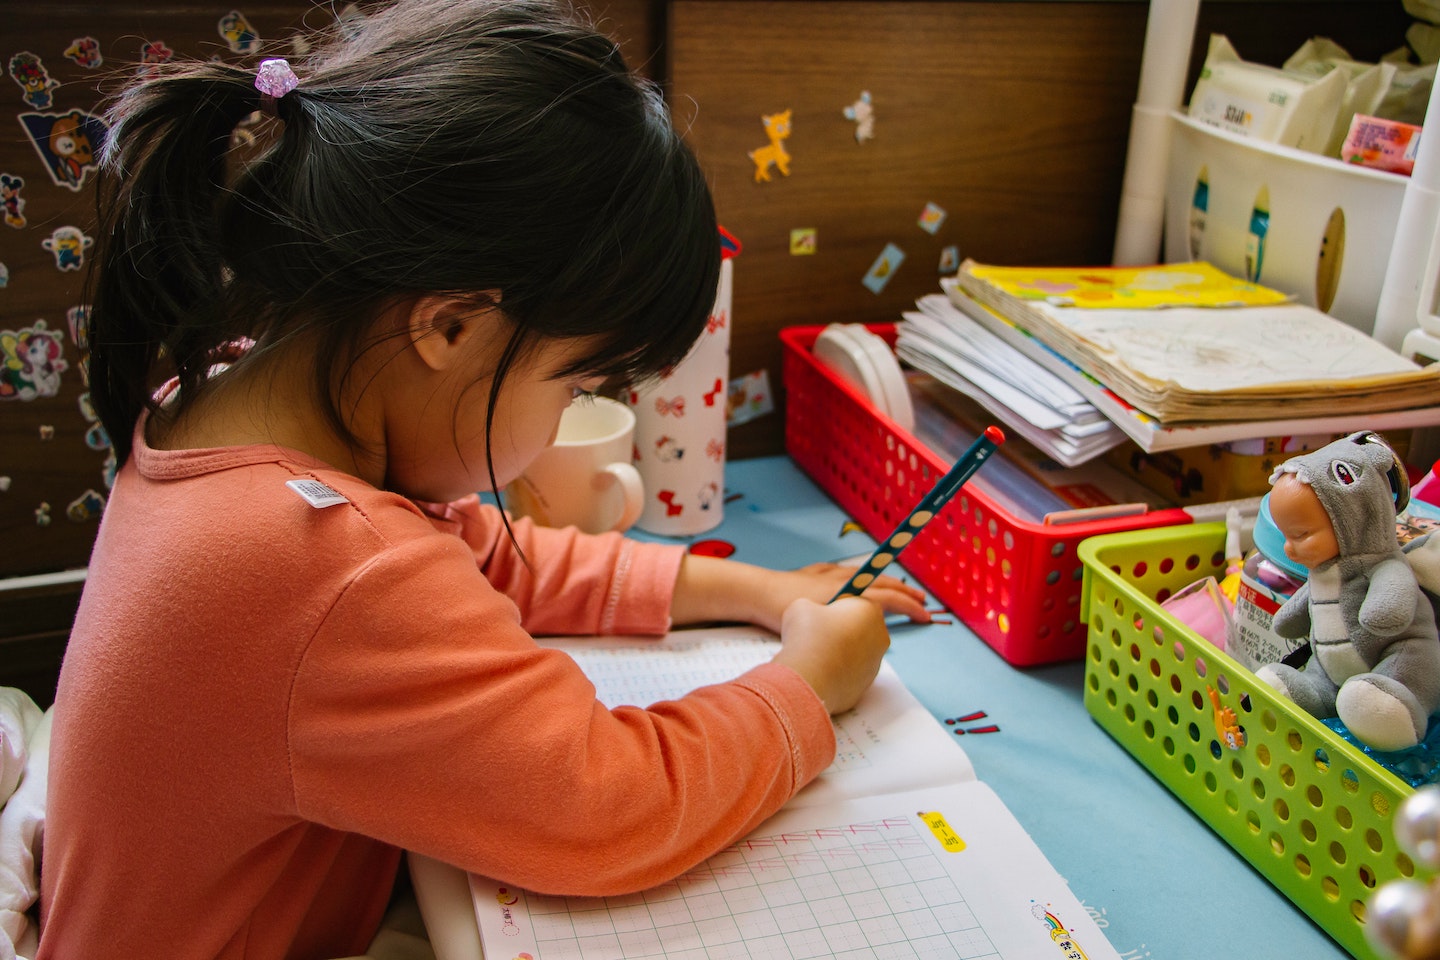 Young girl with black pony tail and orange shirt completing worksheet in school